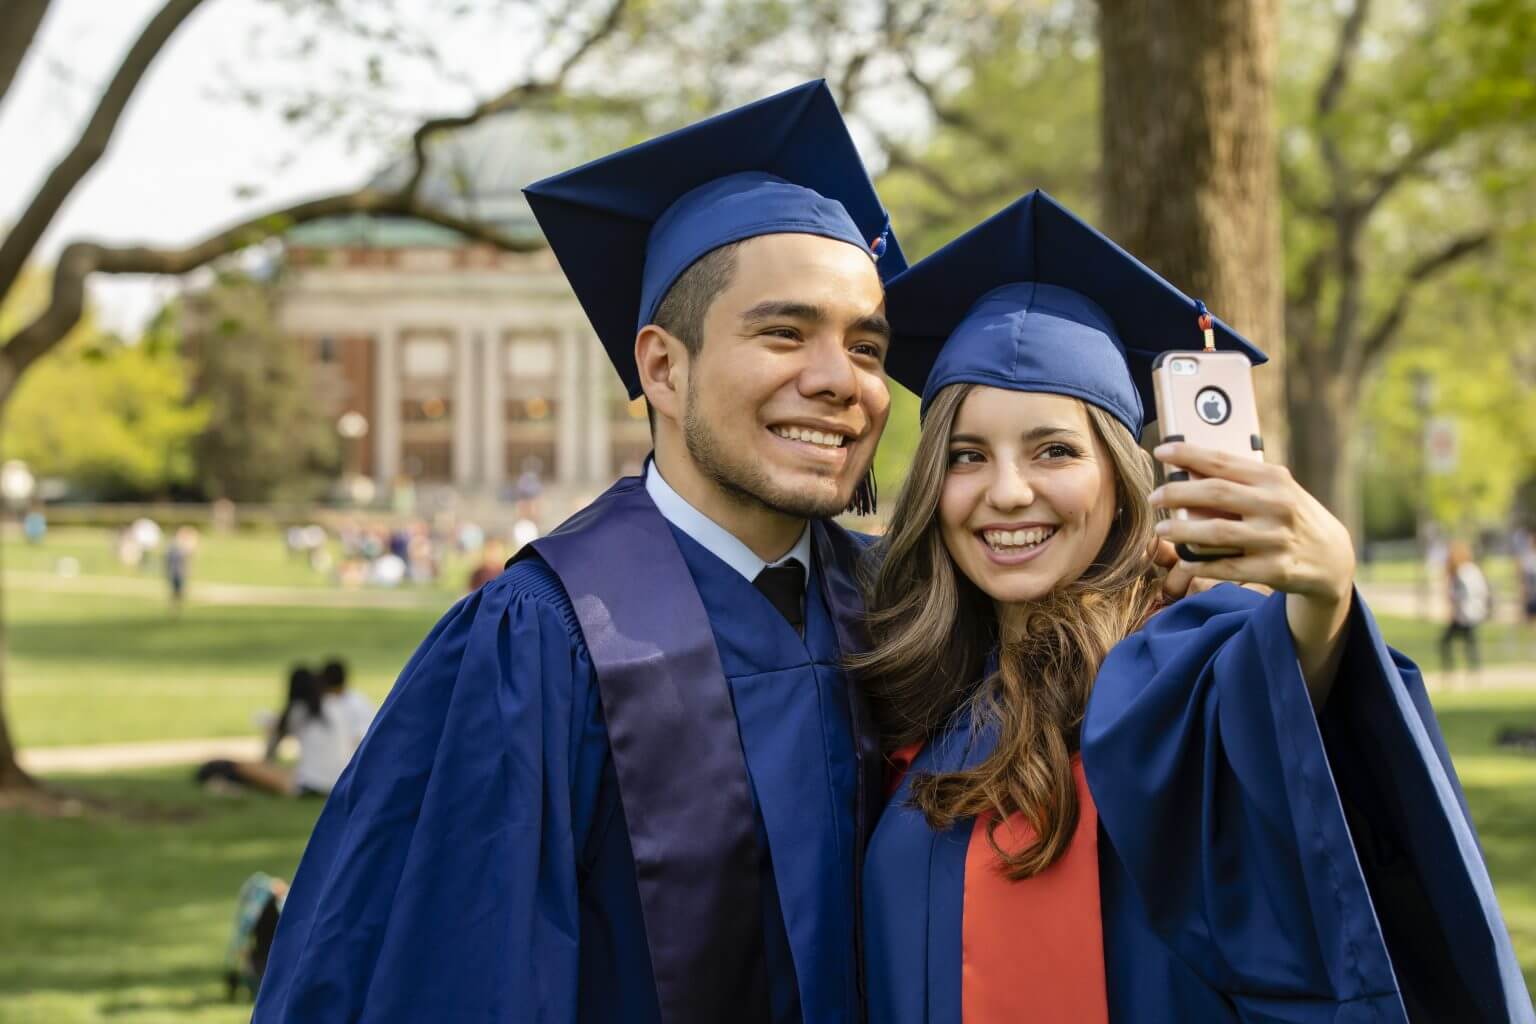 Two students taking a graduation selfie in their caps and gowns